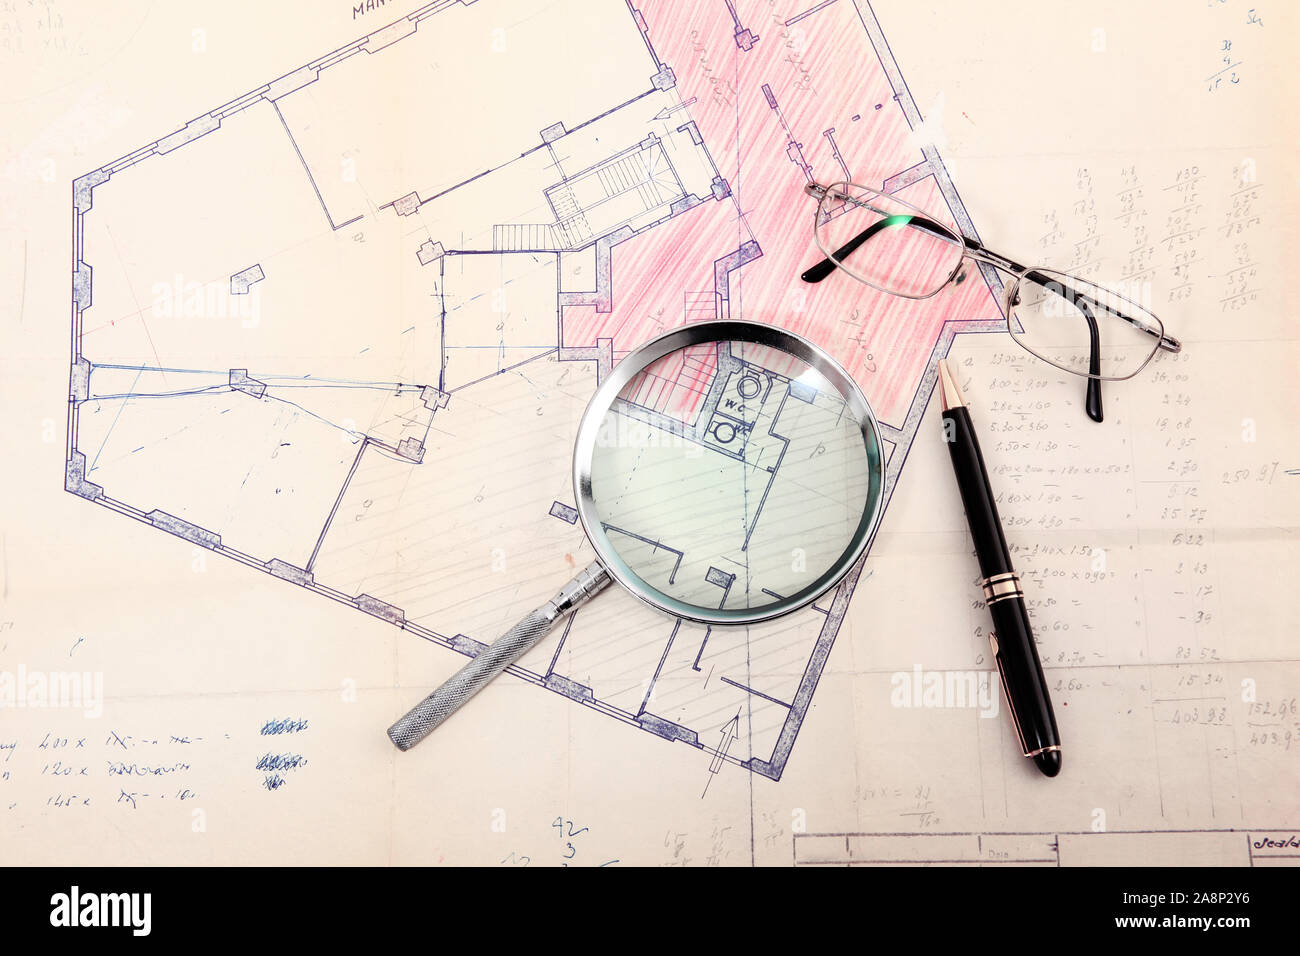 old Cadastral map with glasses and pen Stock Photo